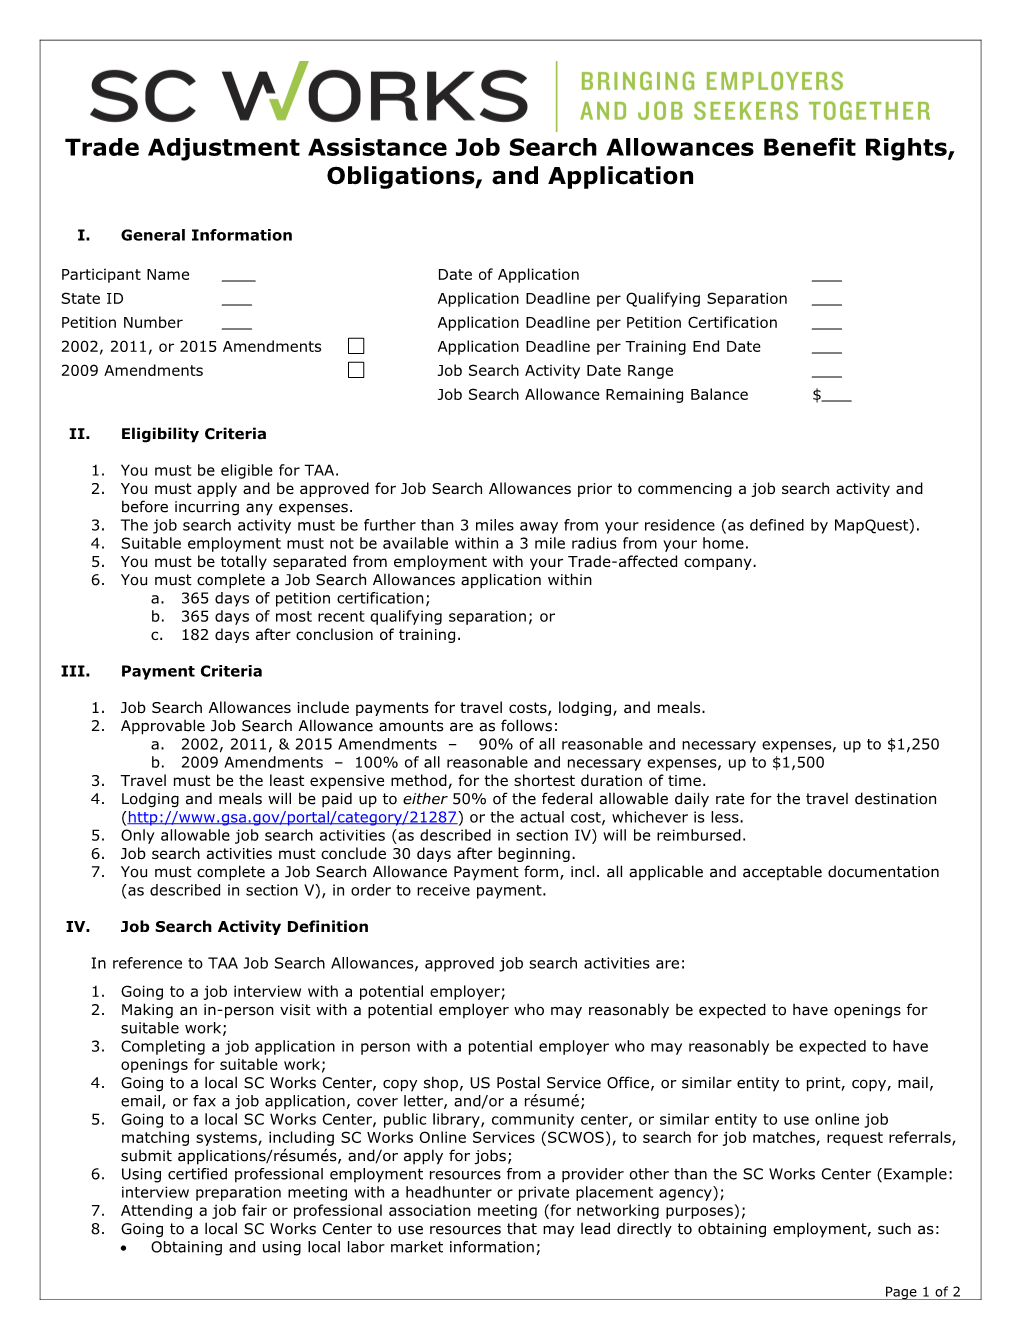 Trade Adjustment Assistance Job Search Allowances Benefit Rights, Obligations, and Application